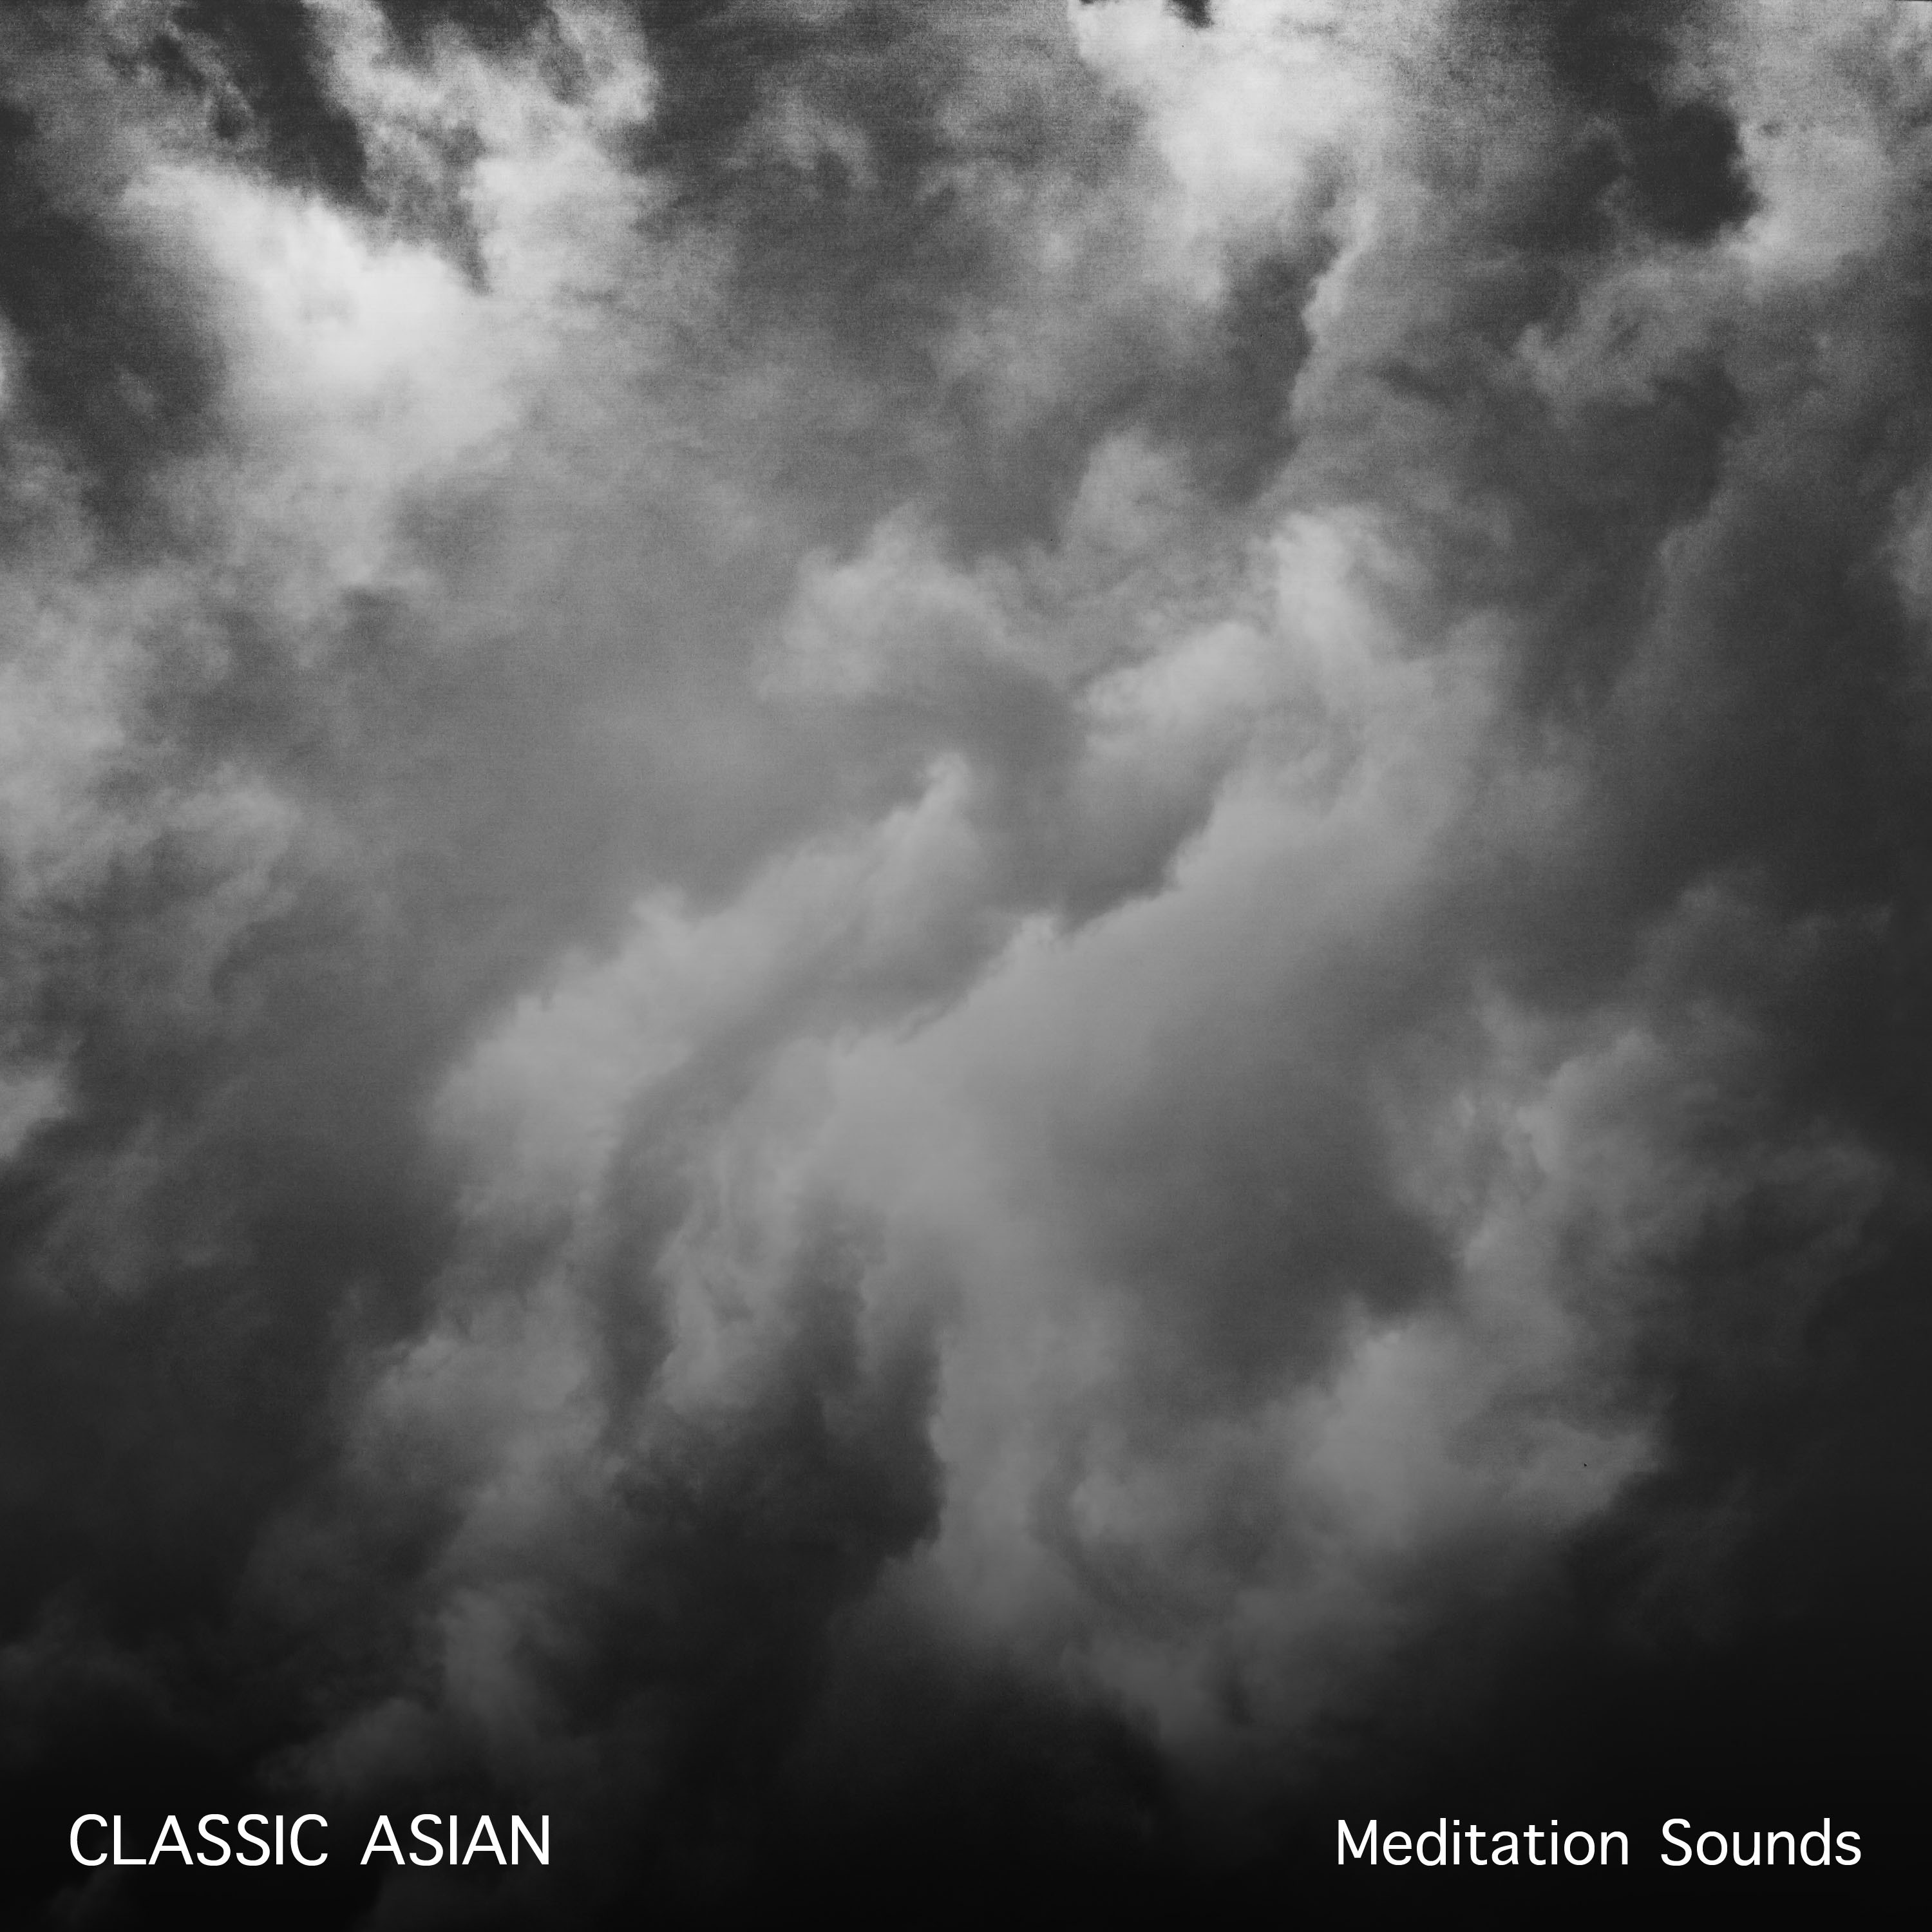 12 Classic Asian Meditation Sounds for Guided Meditation and Relaxation